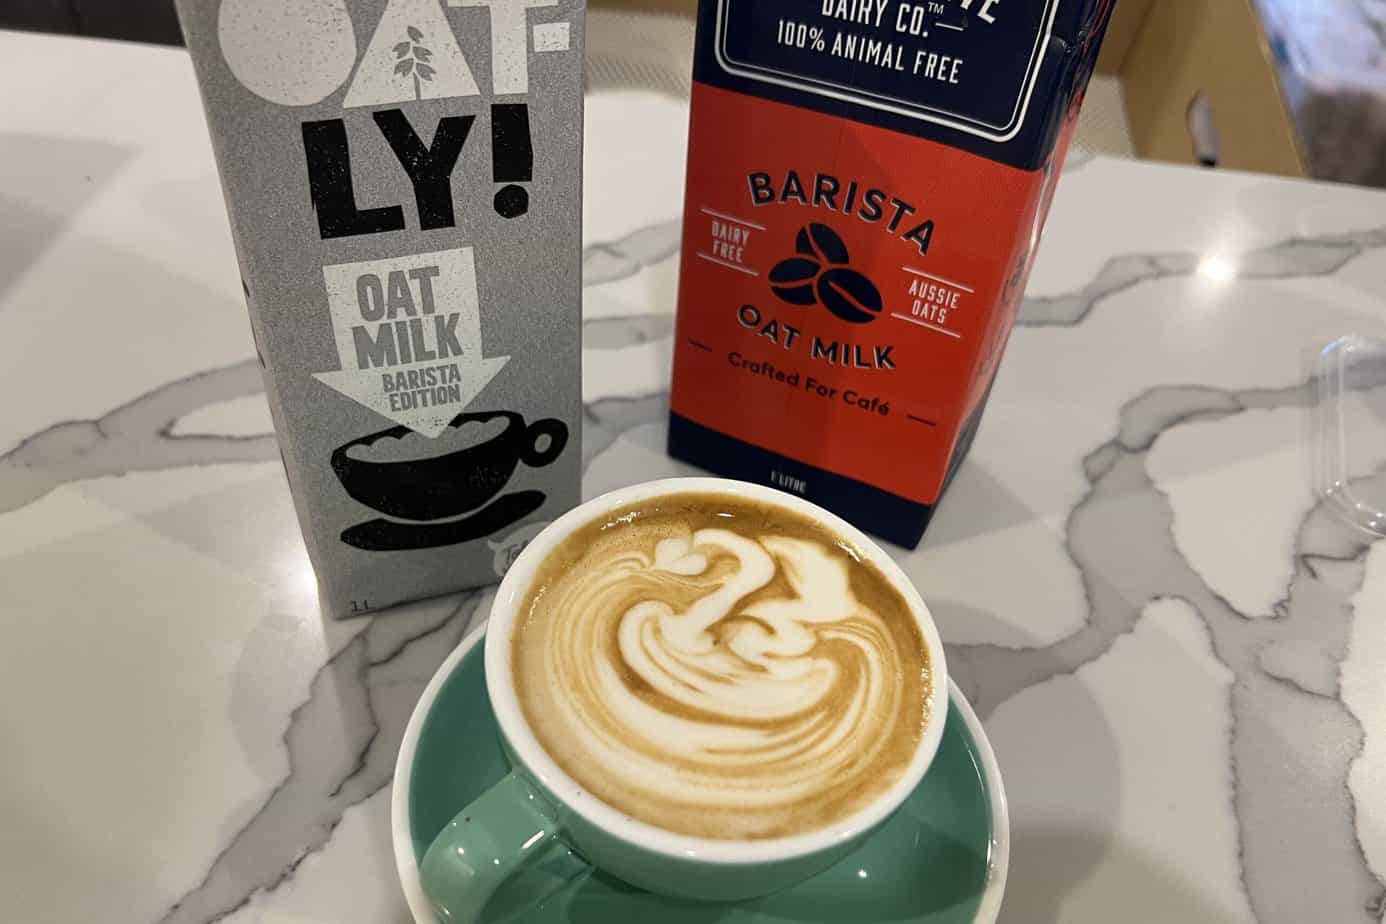 Latte art made with oat milk